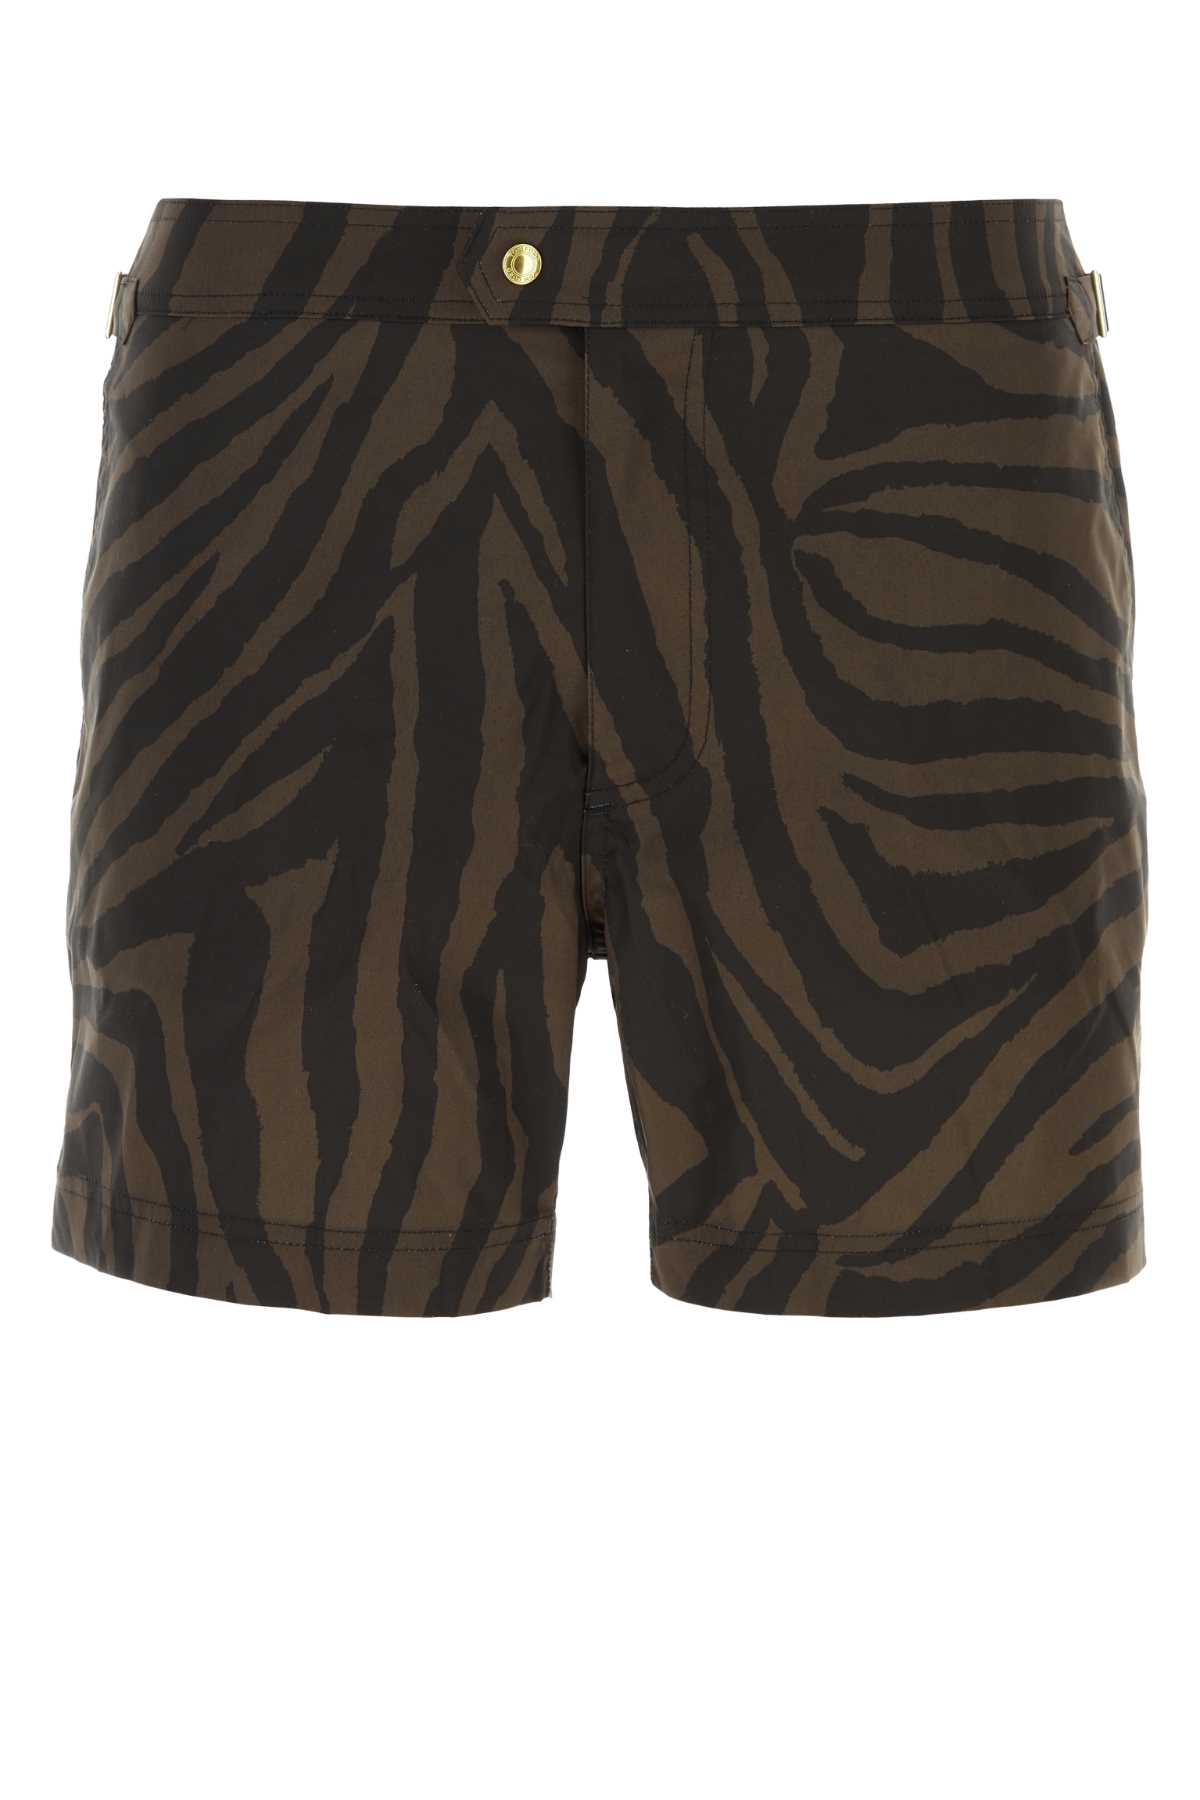 TOM FORD PRINTED POLYESTER SWIMMING SHORTS